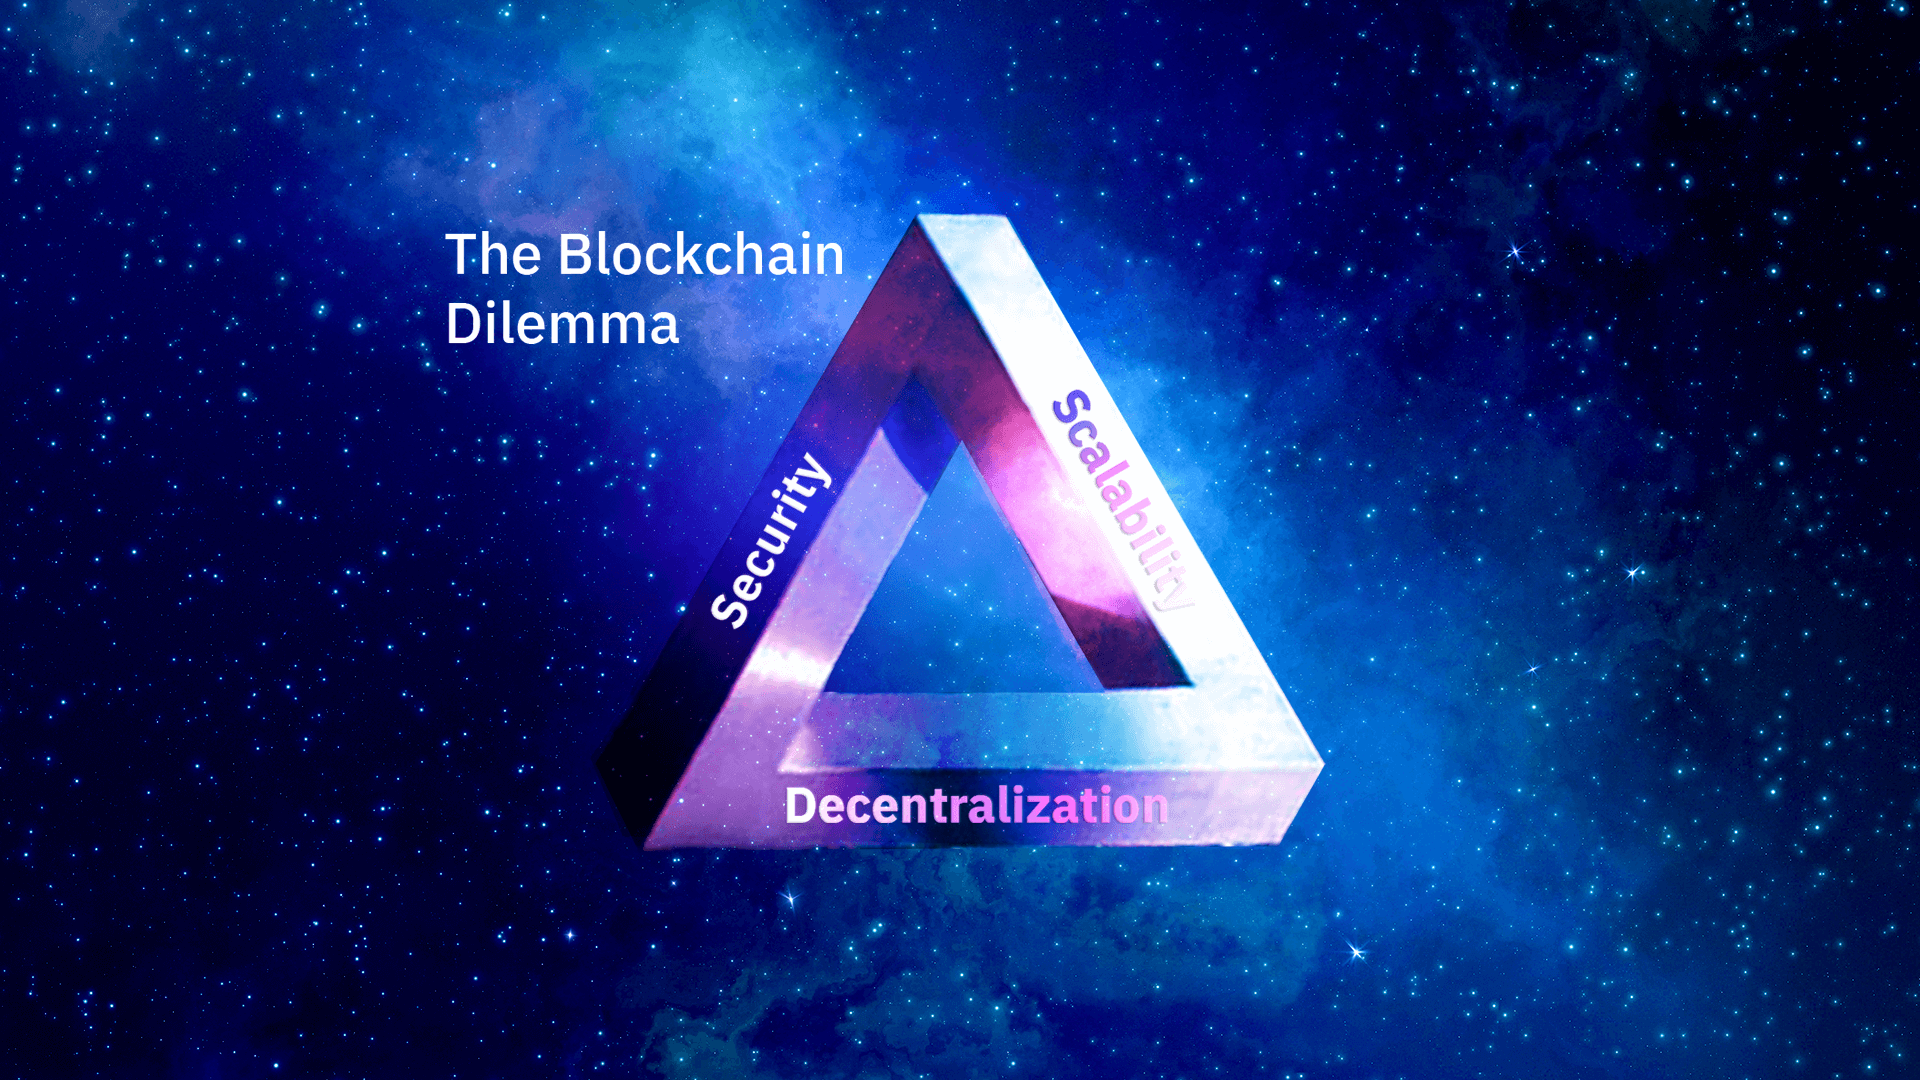 Blockchain Dilemma: The Impossible Triangle